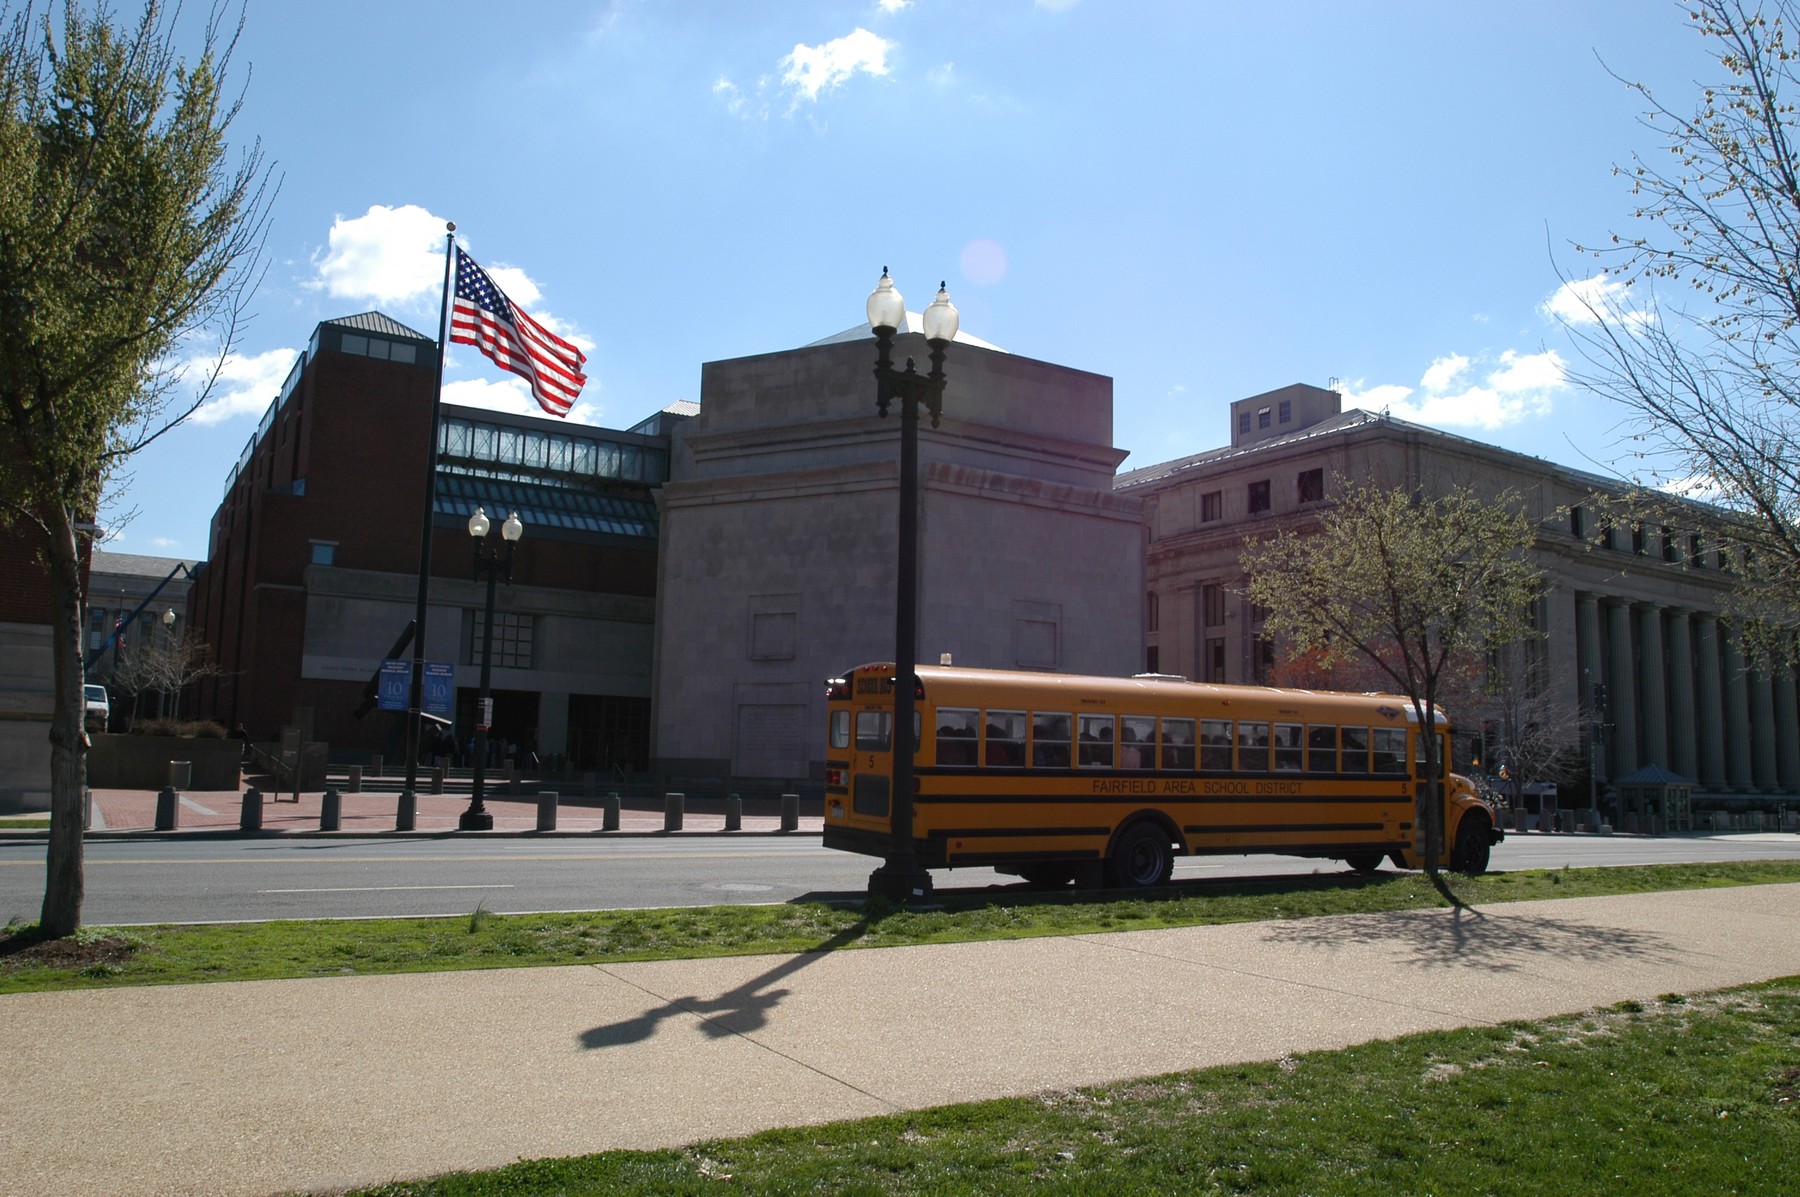 View of Eisenhower Plaza and the 15th Street entrance to the U.S. Holocaust Memorial Museum from across 15th Street.